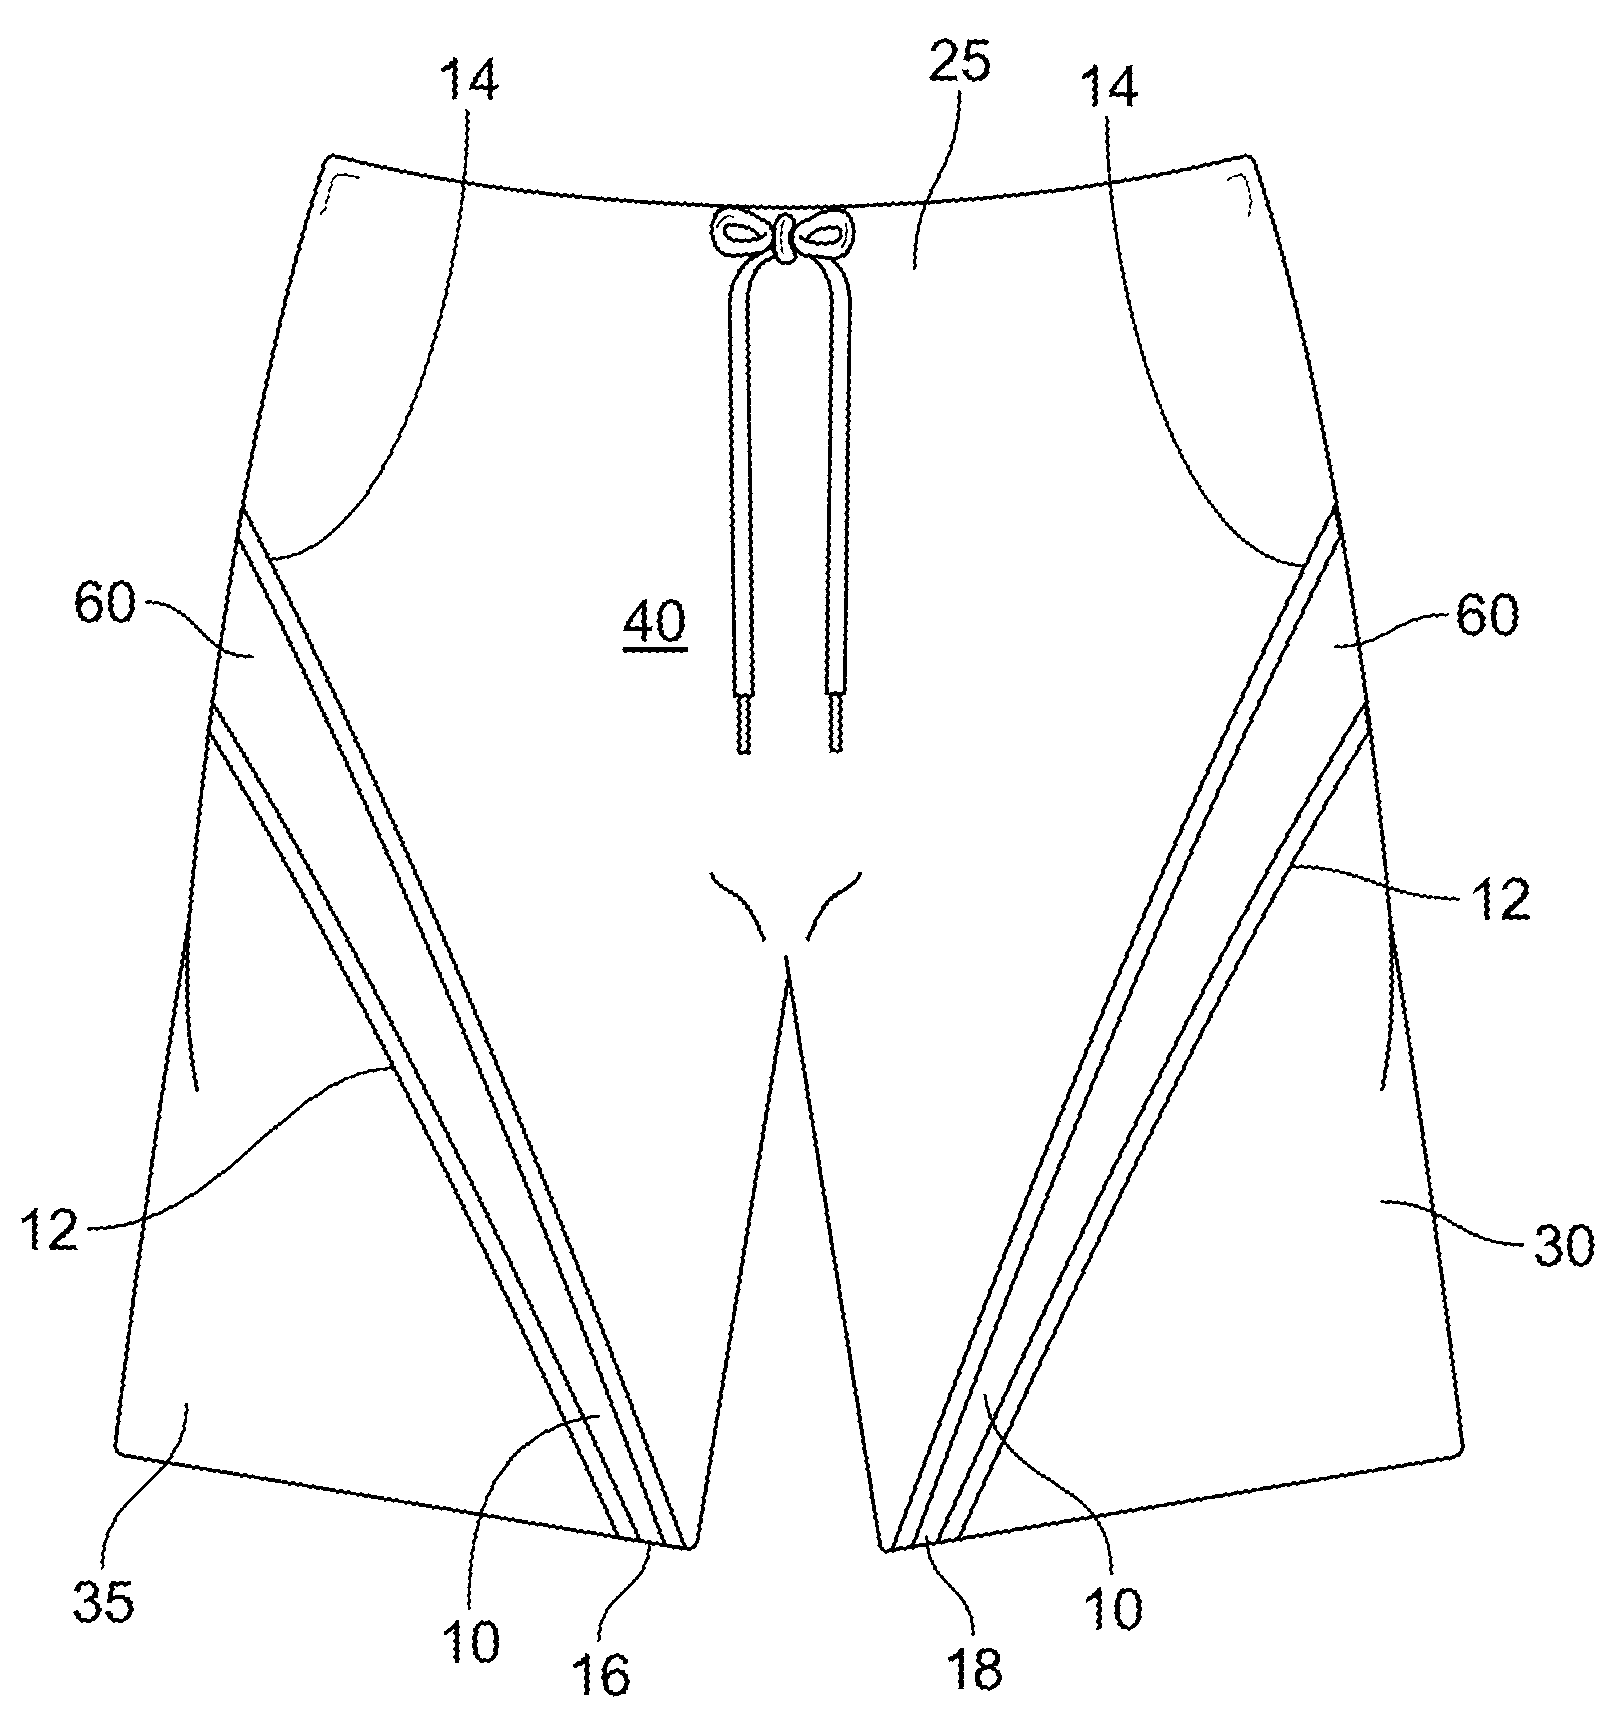 Garment with Stretchable Section and Related Methods - Eureka | Patsnap